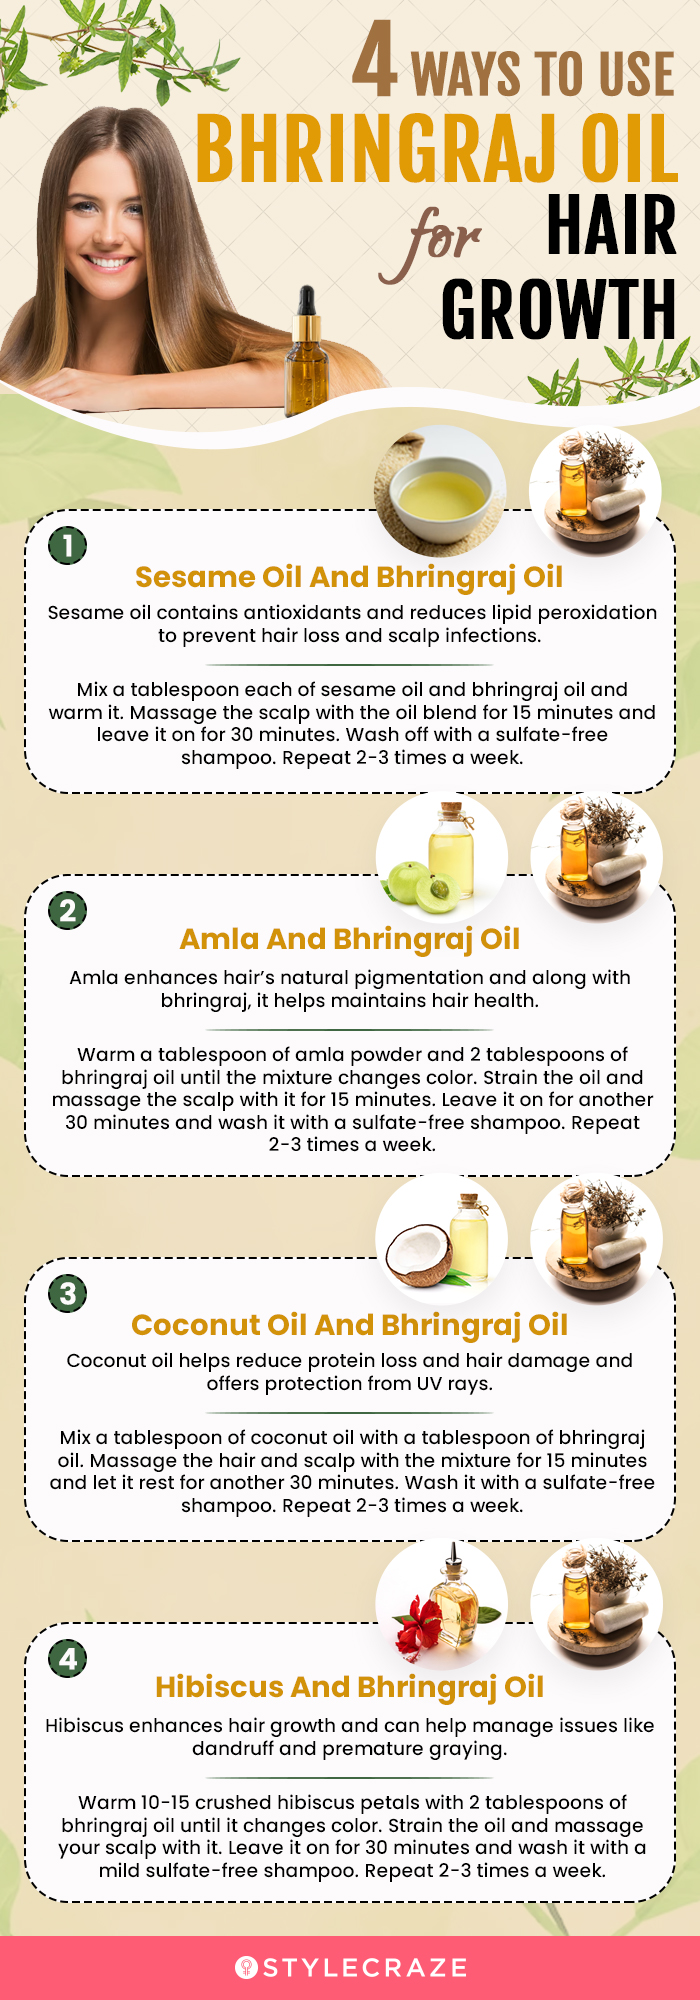 4 ways to use bhringraj oil for hair growth (infographic)